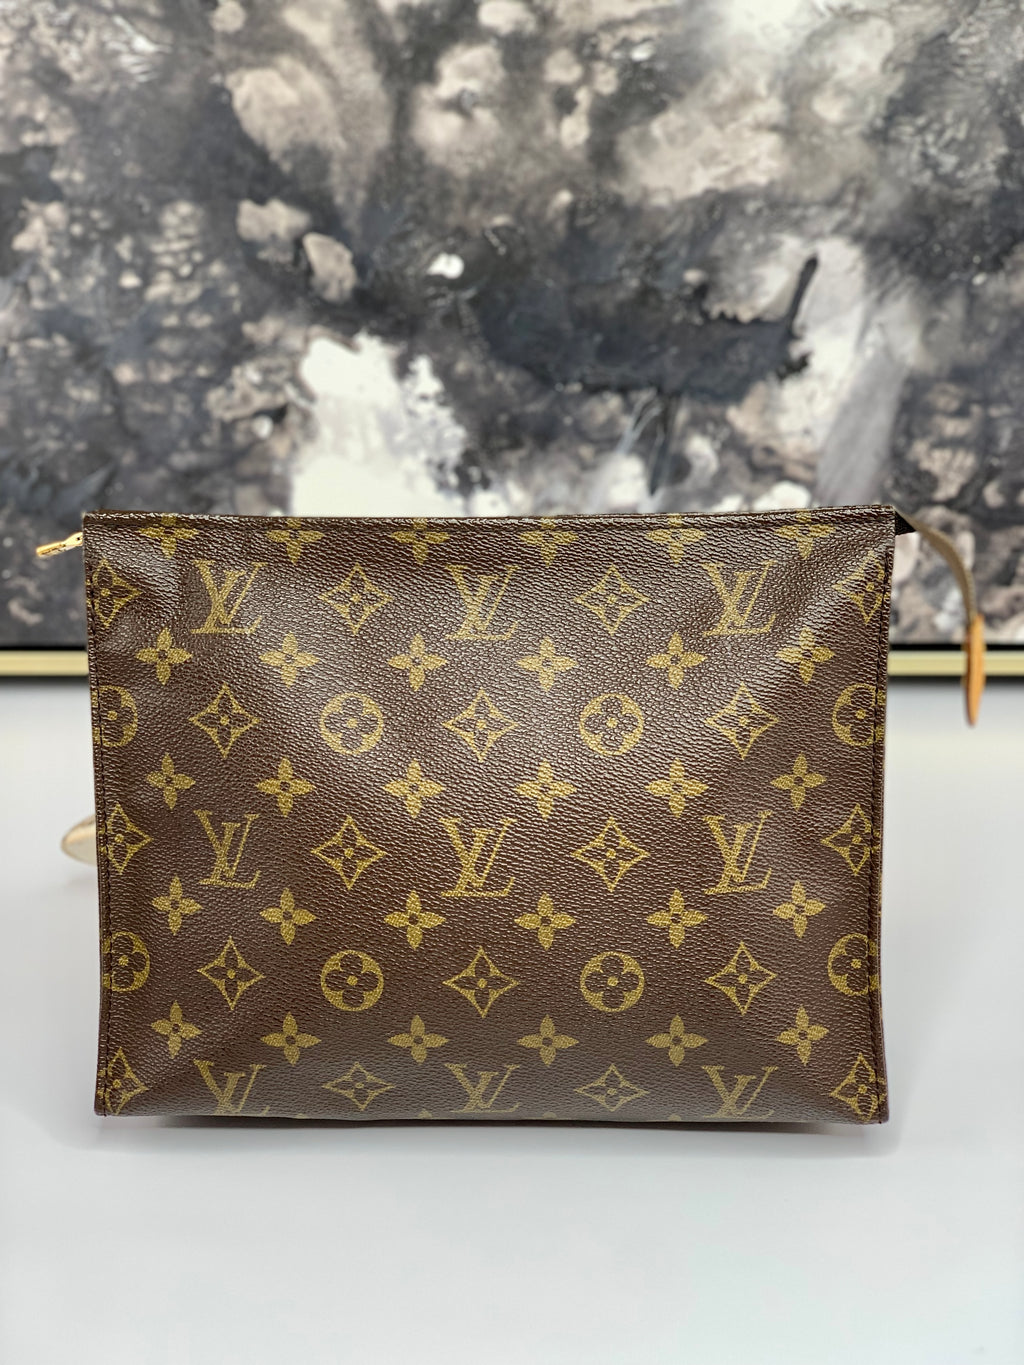 Very Rare Louis Vuitton Toiletry Pouch 26 Clutch